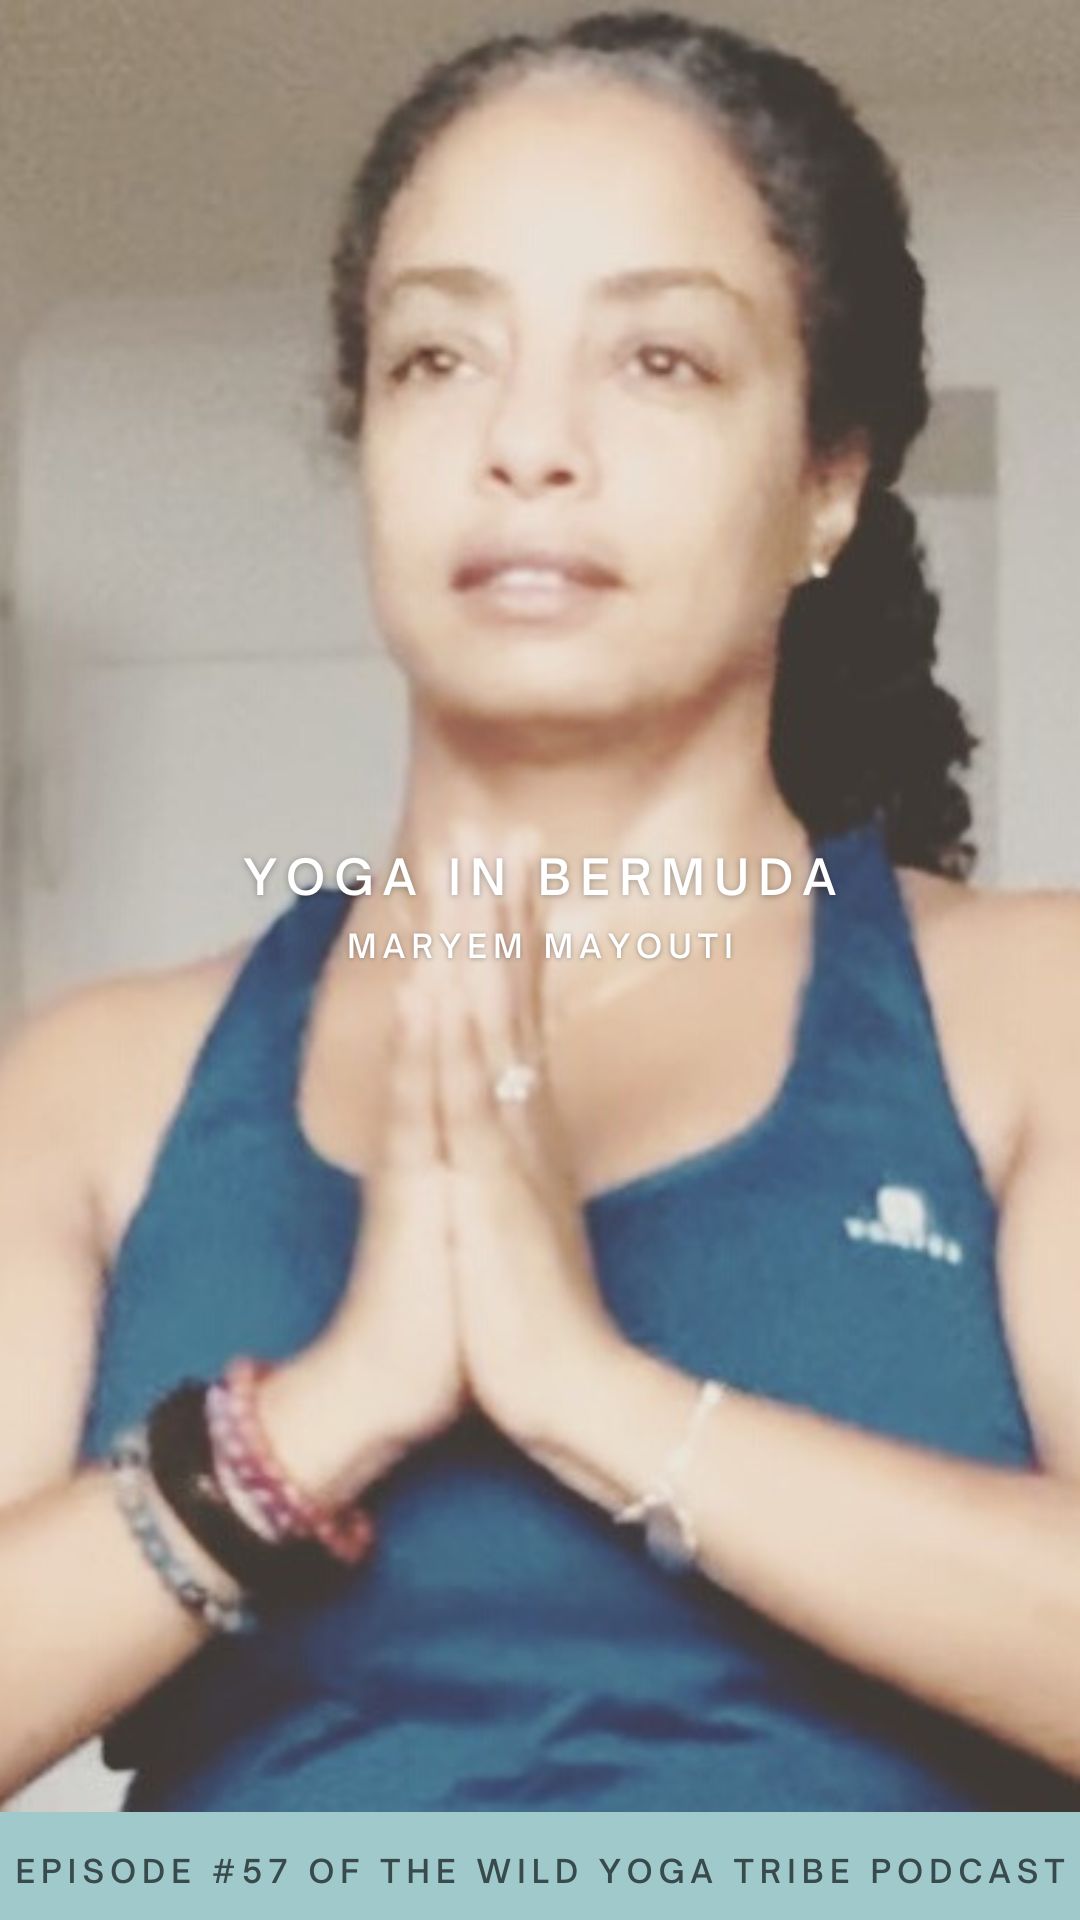 Meet Maryem Mayouti, a yoga teacher from Bermuda who shares with us all about the humility and humanity in yoga! Welcome to yoga in Bermuda!